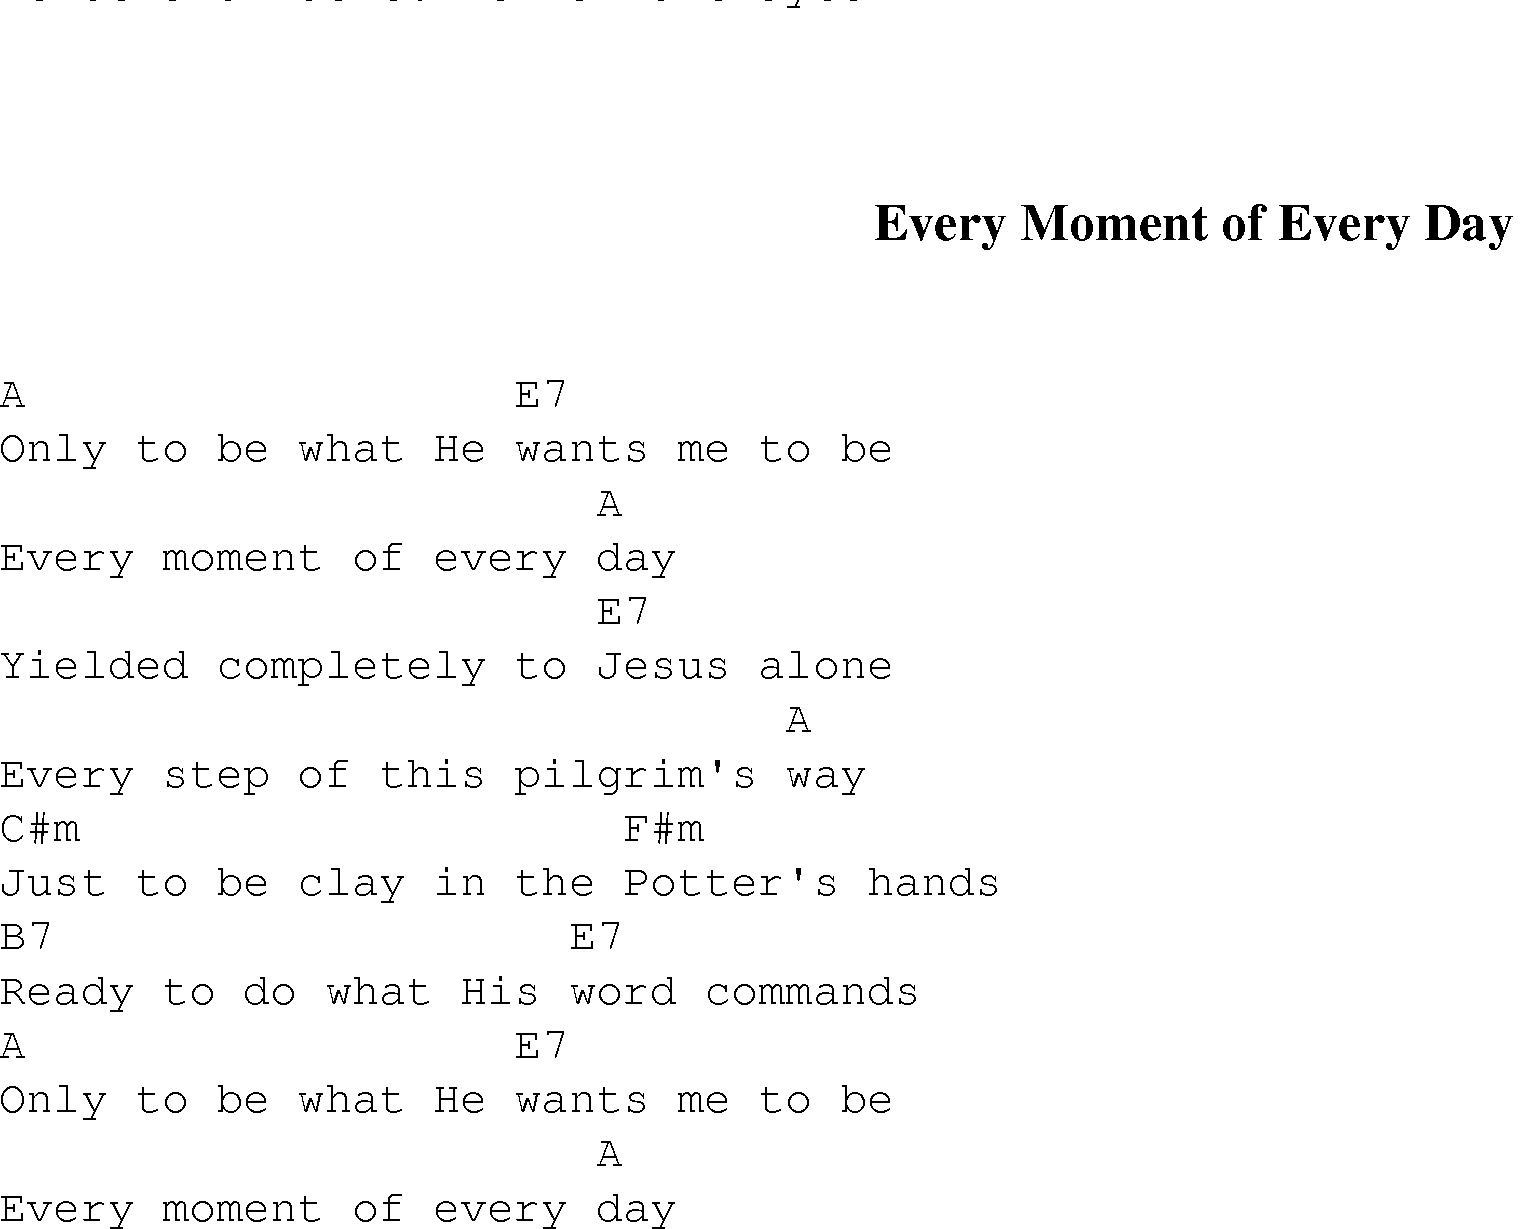 Gospel Song: every_moment_of_every_day, lyrics and chords.